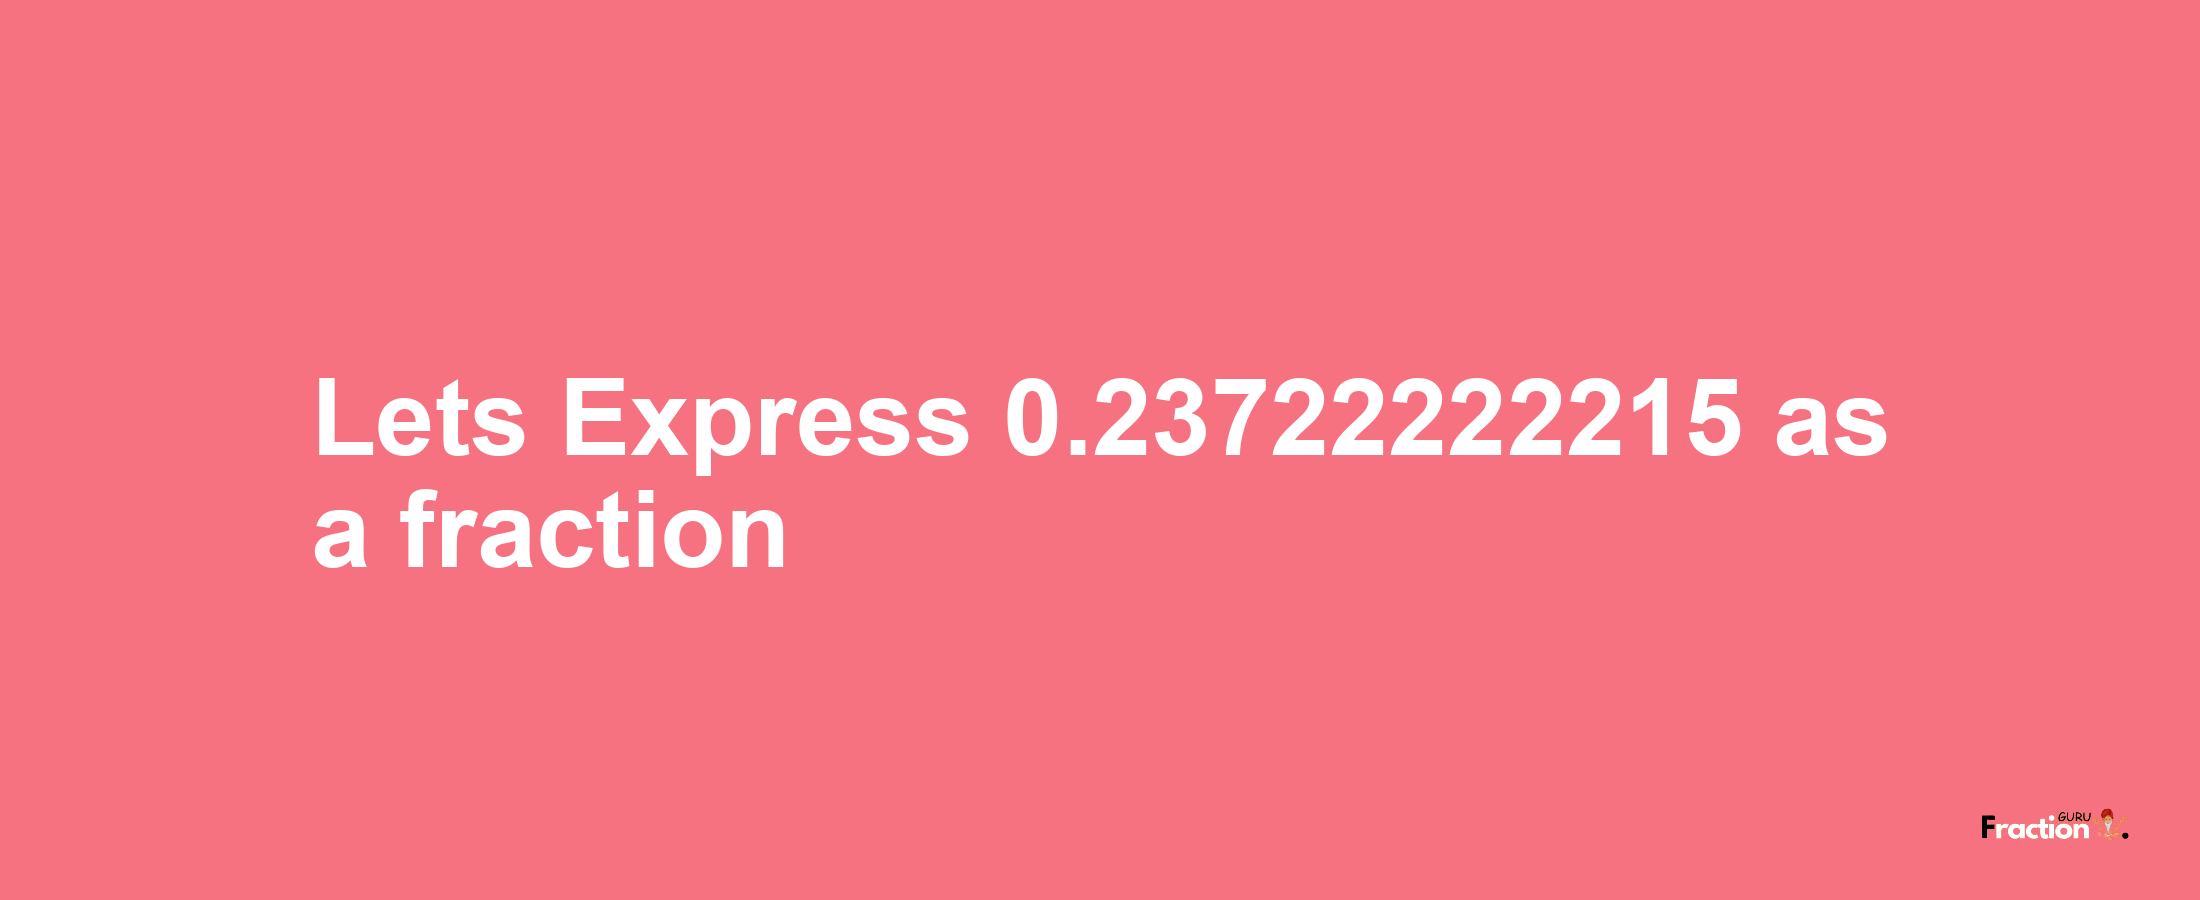 Lets Express 0.23722222215 as afraction